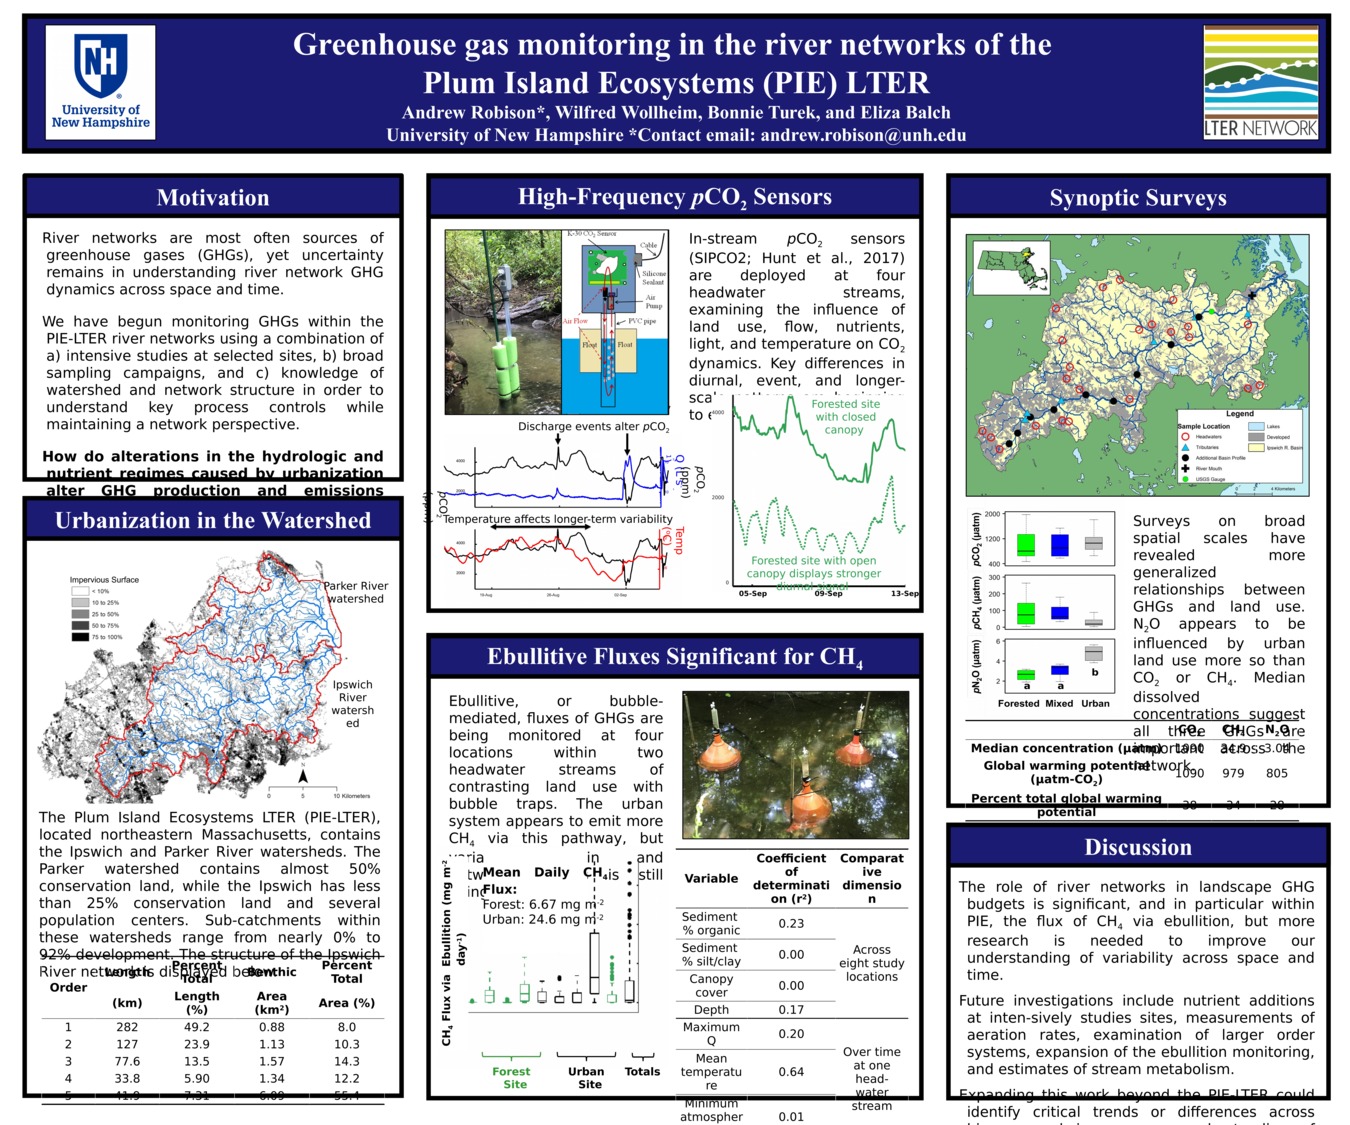 Greenhouse Gas Monitoring In The River Networks Of The  Plum Island Ecosystems (Pie) Lter by alr1020